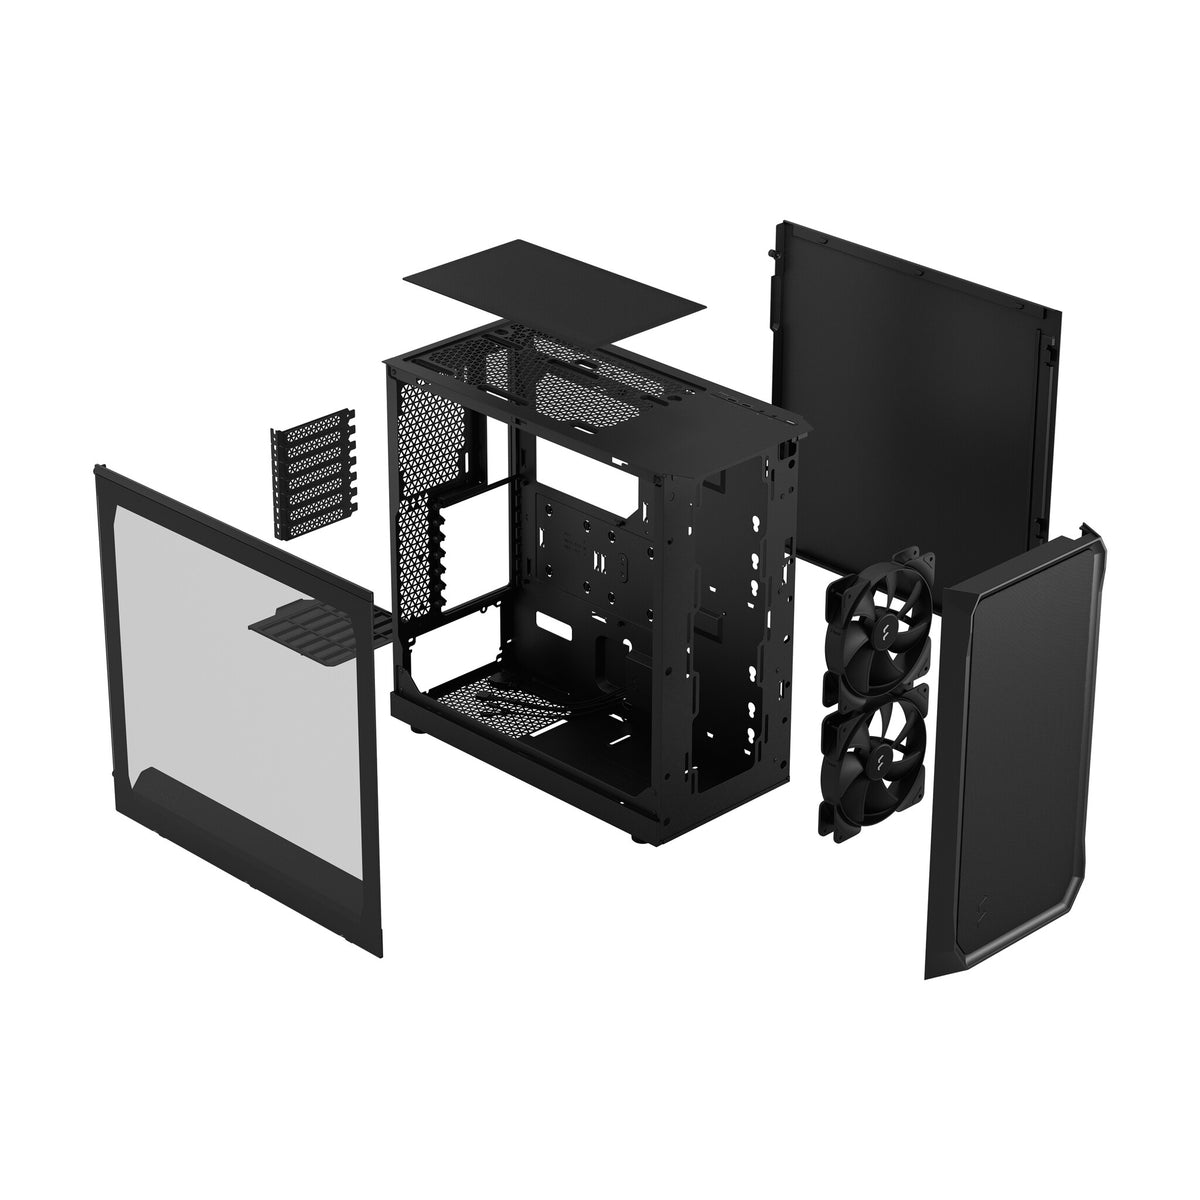 Fractal Design Focus 2 -  ATX Mid Tower Case in Black / Clear